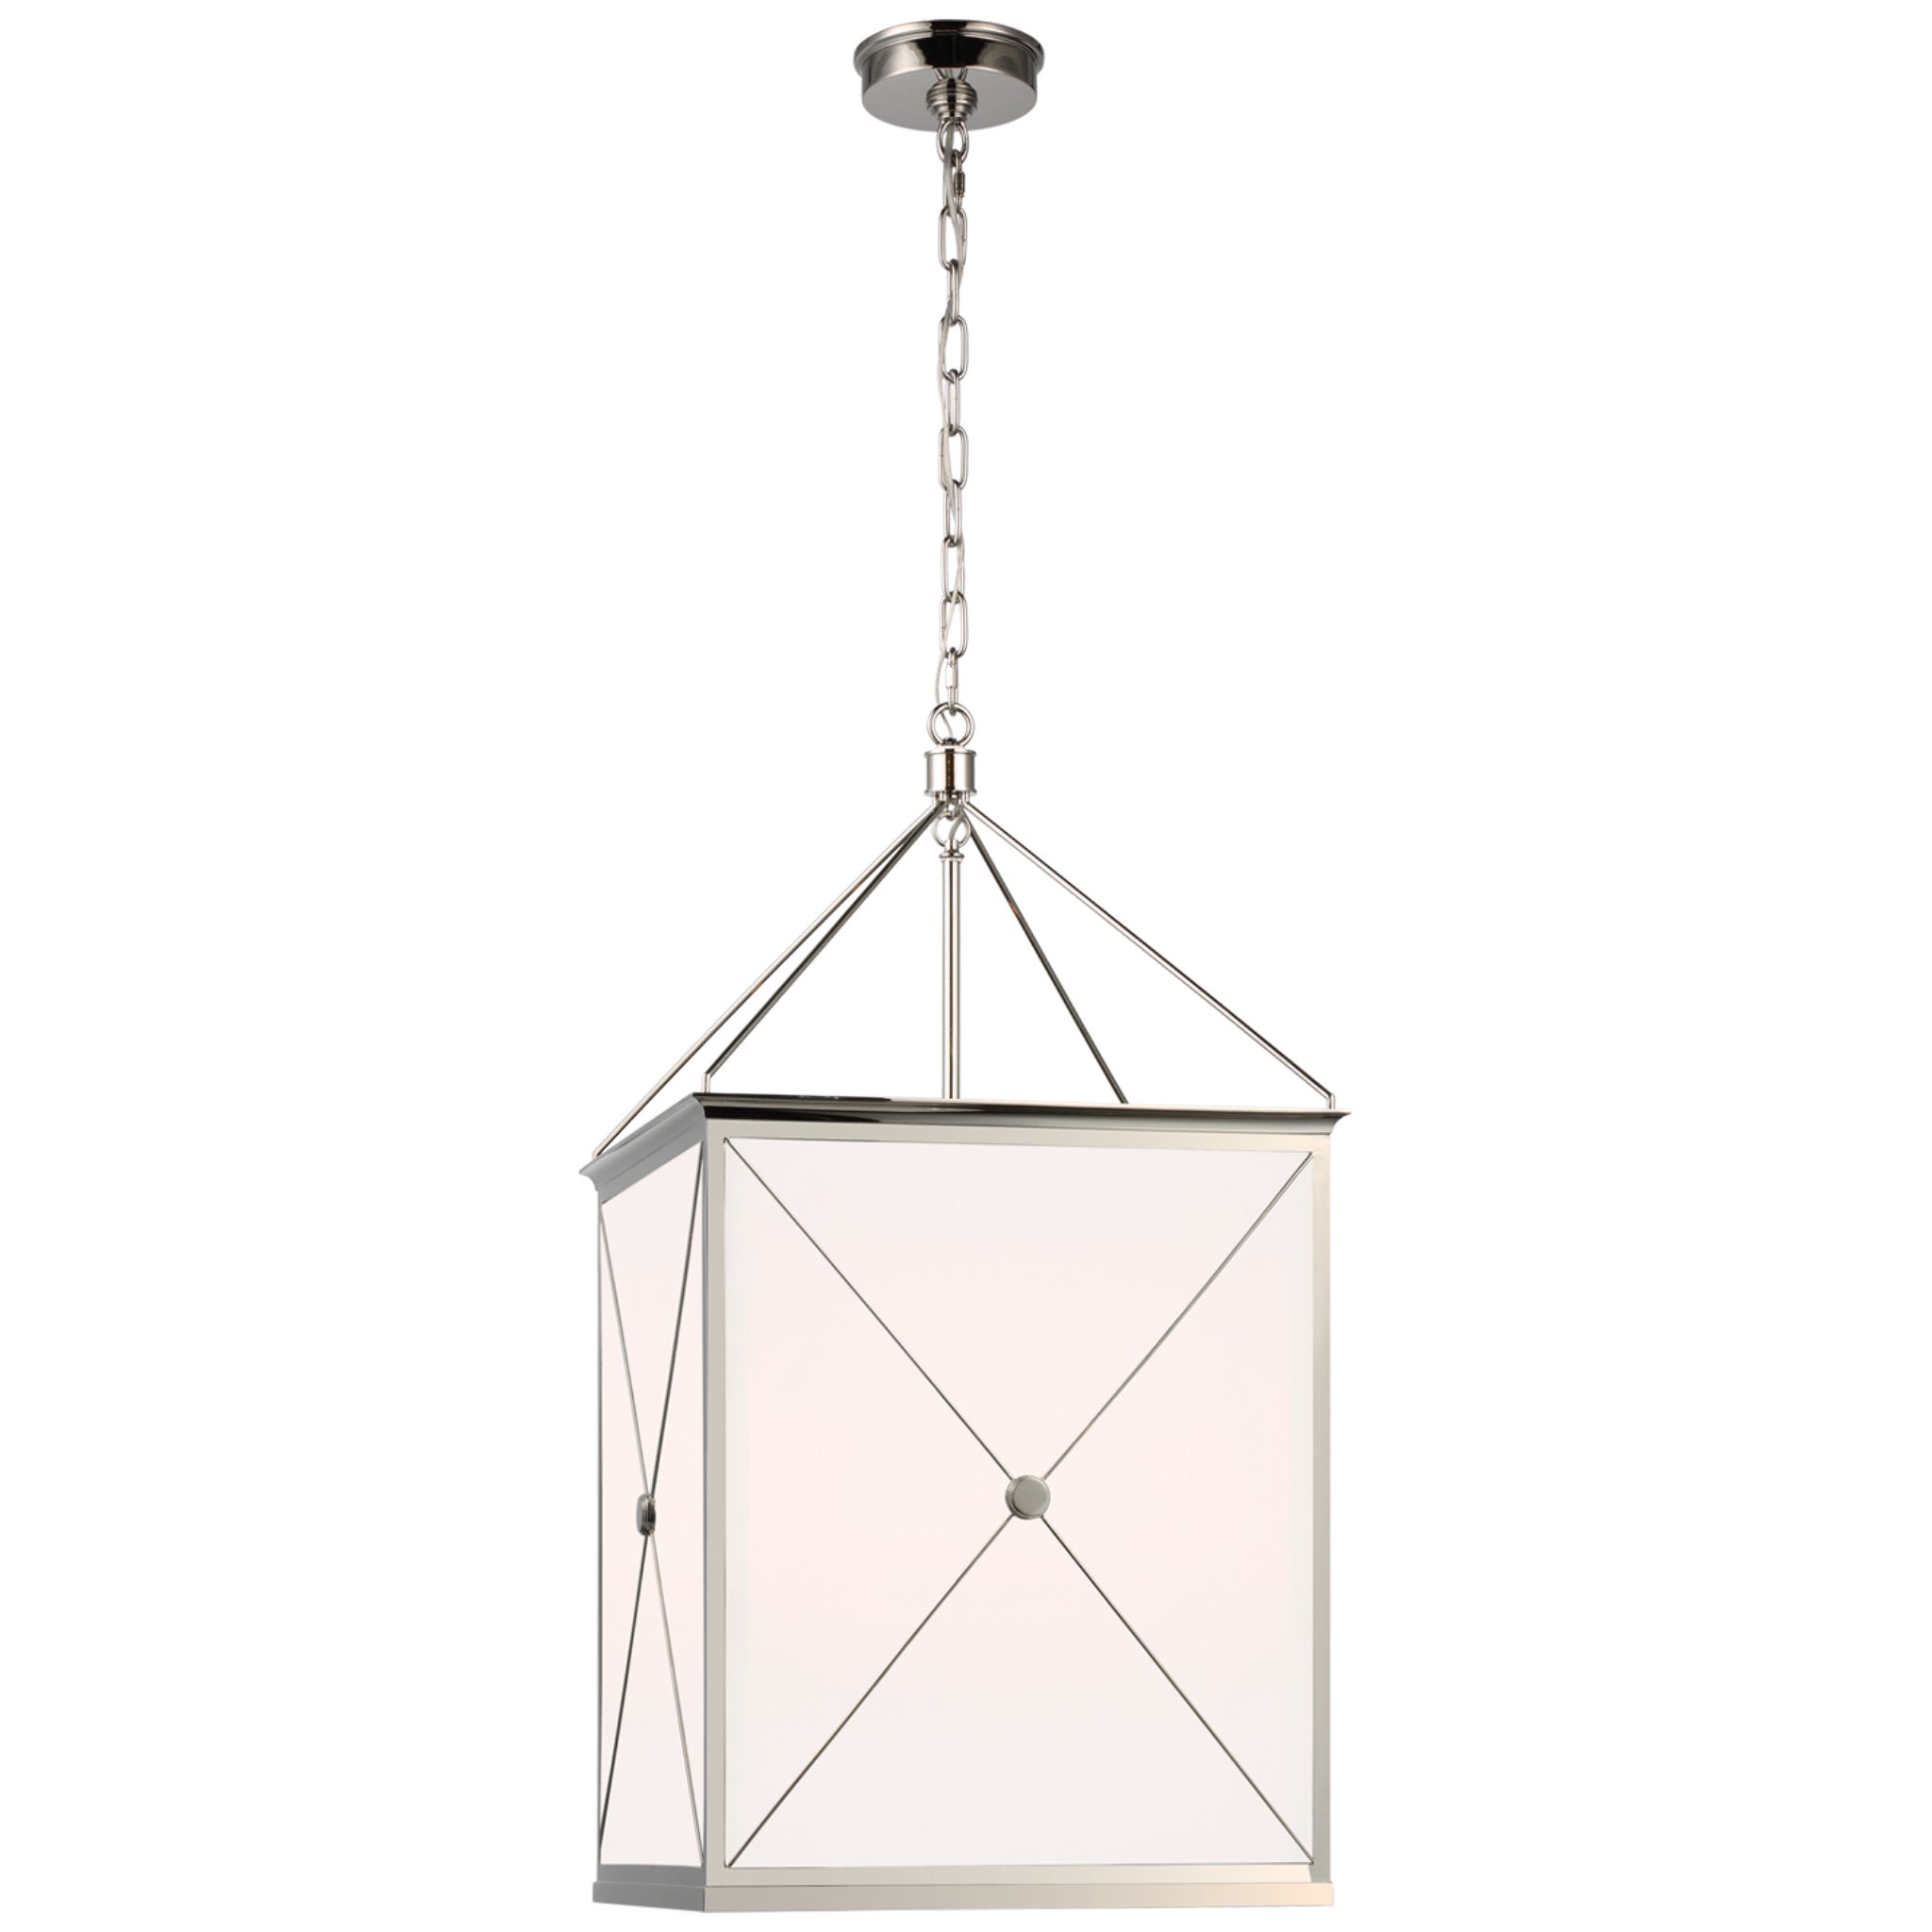 Julie Neill Rossi Medium Lantern in Polished Nickel with White Glass